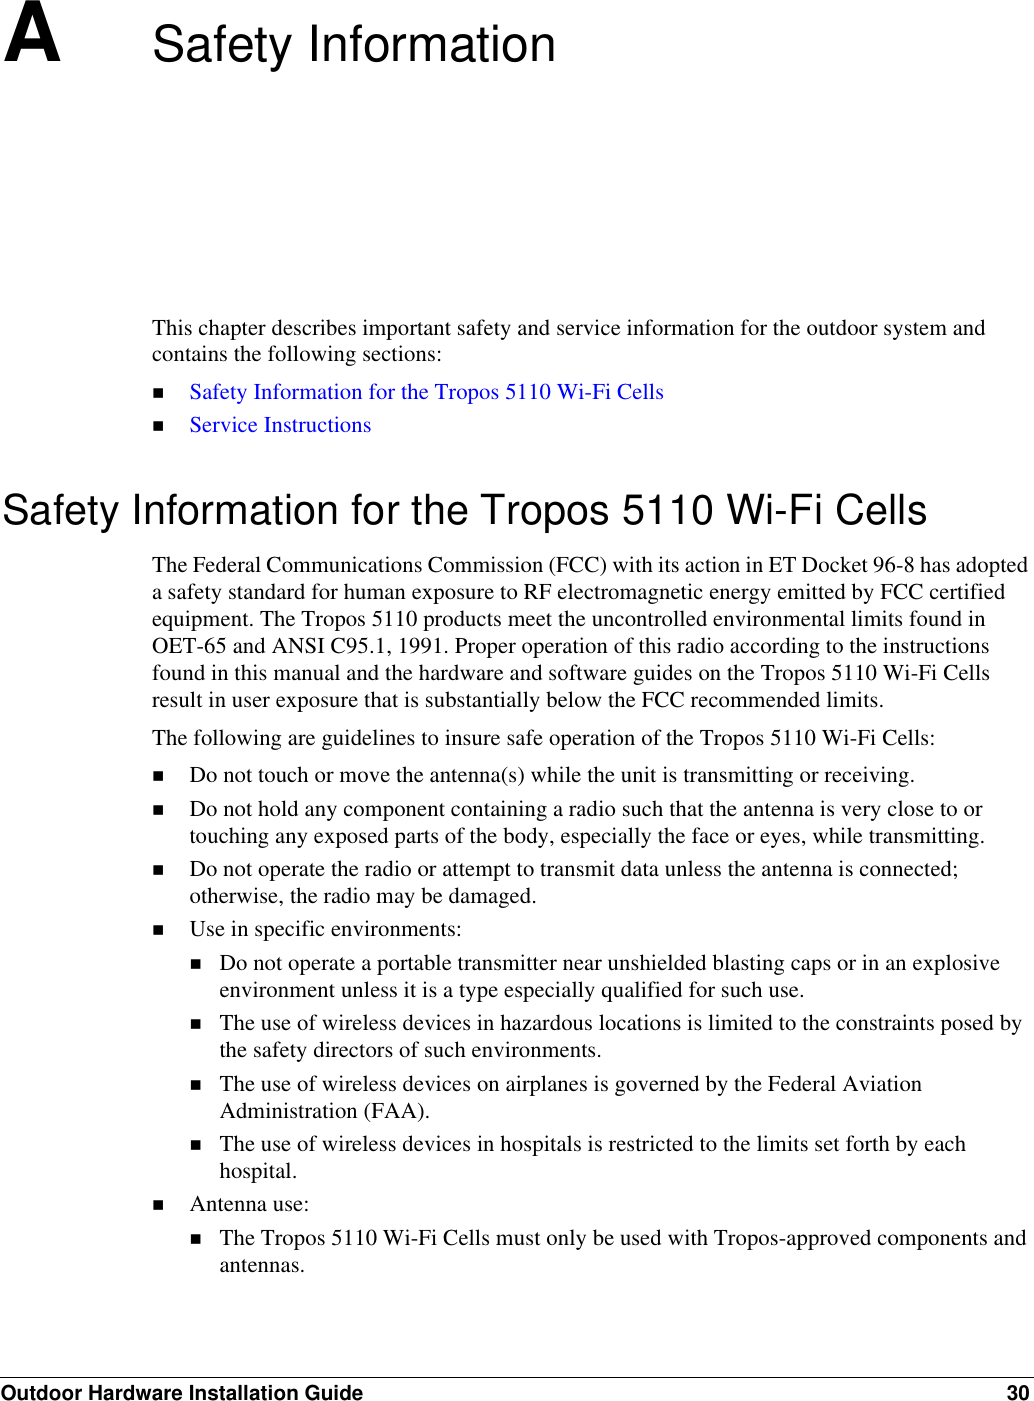 Outdoor Hardware Installation Guide 30ASafety InformationThis chapter describes important safety and service information for the outdoor system and contains the following sections:Safety Information for the Tropos 5110 Wi-Fi CellsService InstructionsSafety Information for the Tropos 5110 Wi-Fi CellsThe Federal Communications Commission (FCC) with its action in ET Docket 96-8 has adopted a safety standard for human exposure to RF electromagnetic energy emitted by FCC certified equipment. The Tropos 5110 products meet the uncontrolled environmental limits found in OET-65 and ANSI C95.1, 1991. Proper operation of this radio according to the instructions found in this manual and the hardware and software guides on the Tropos 5110 Wi-Fi Cells result in user exposure that is substantially below the FCC recommended limits.The following are guidelines to insure safe operation of the Tropos 5110 Wi-Fi Cells:Do not touch or move the antenna(s) while the unit is transmitting or receiving.Do not hold any component containing a radio such that the antenna is very close to or touching any exposed parts of the body, especially the face or eyes, while transmitting. Do not operate the radio or attempt to transmit data unless the antenna is connected; otherwise, the radio may be damaged.Use in specific environments:Do not operate a portable transmitter near unshielded blasting caps or in an explosive environment unless it is a type especially qualified for such use.The use of wireless devices in hazardous locations is limited to the constraints posed by the safety directors of such environments.The use of wireless devices on airplanes is governed by the Federal Aviation Administration (FAA).The use of wireless devices in hospitals is restricted to the limits set forth by each hospital.Antenna use:The Tropos 5110 Wi-Fi Cells must only be used with Tropos-approved components and antennas.